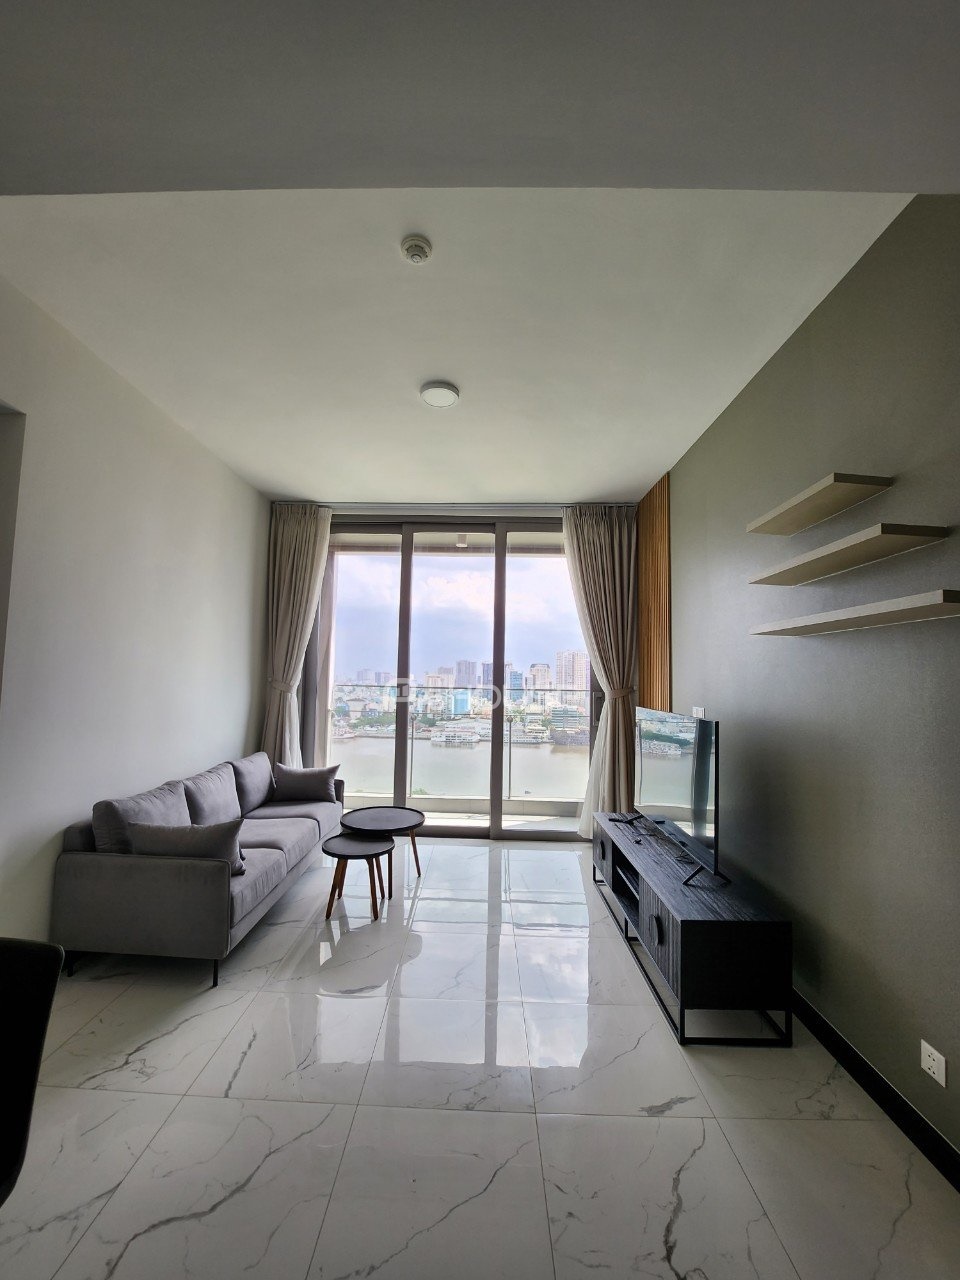 Modern 1-bedroom apartment for rent in Empire City with beautiful view